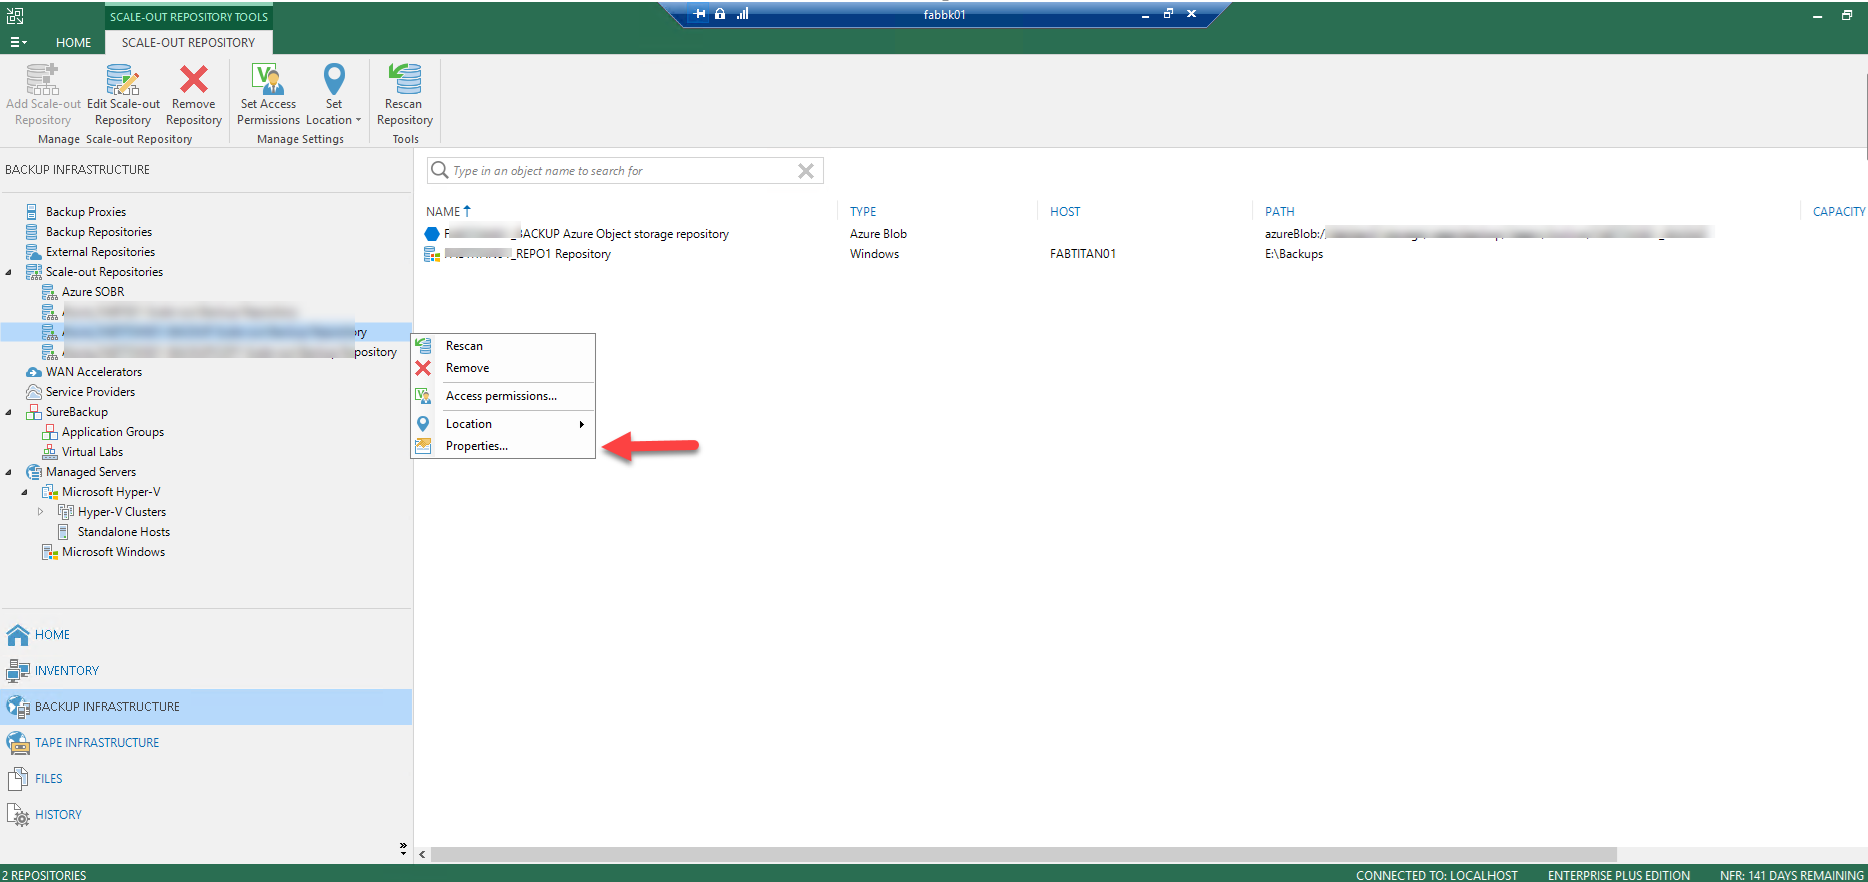 121121 1917 HowtomoveVe2 - How to move Veeam SOBR Performance Tier to another Server (repository)